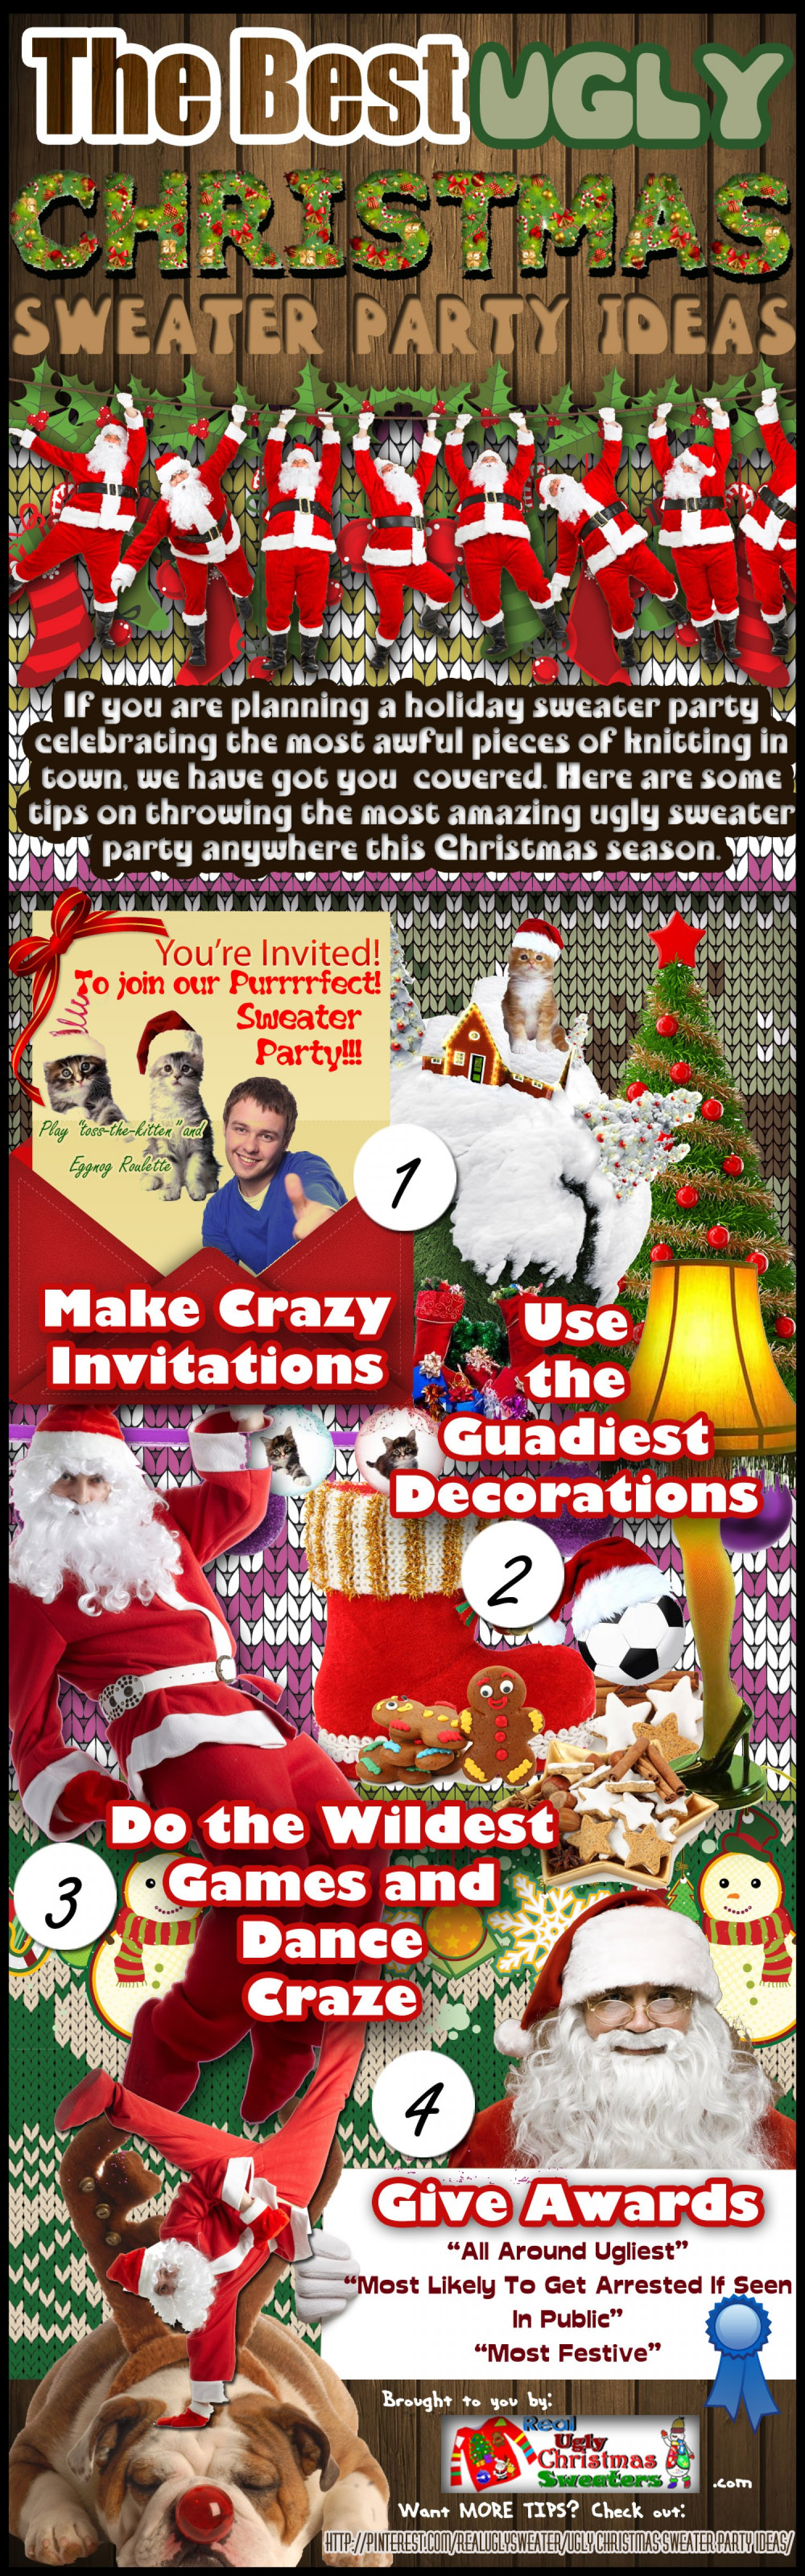 Ugly Sweater Christmas Party Ideas
 The Best Ugly Christmas Sweater Party Ideas